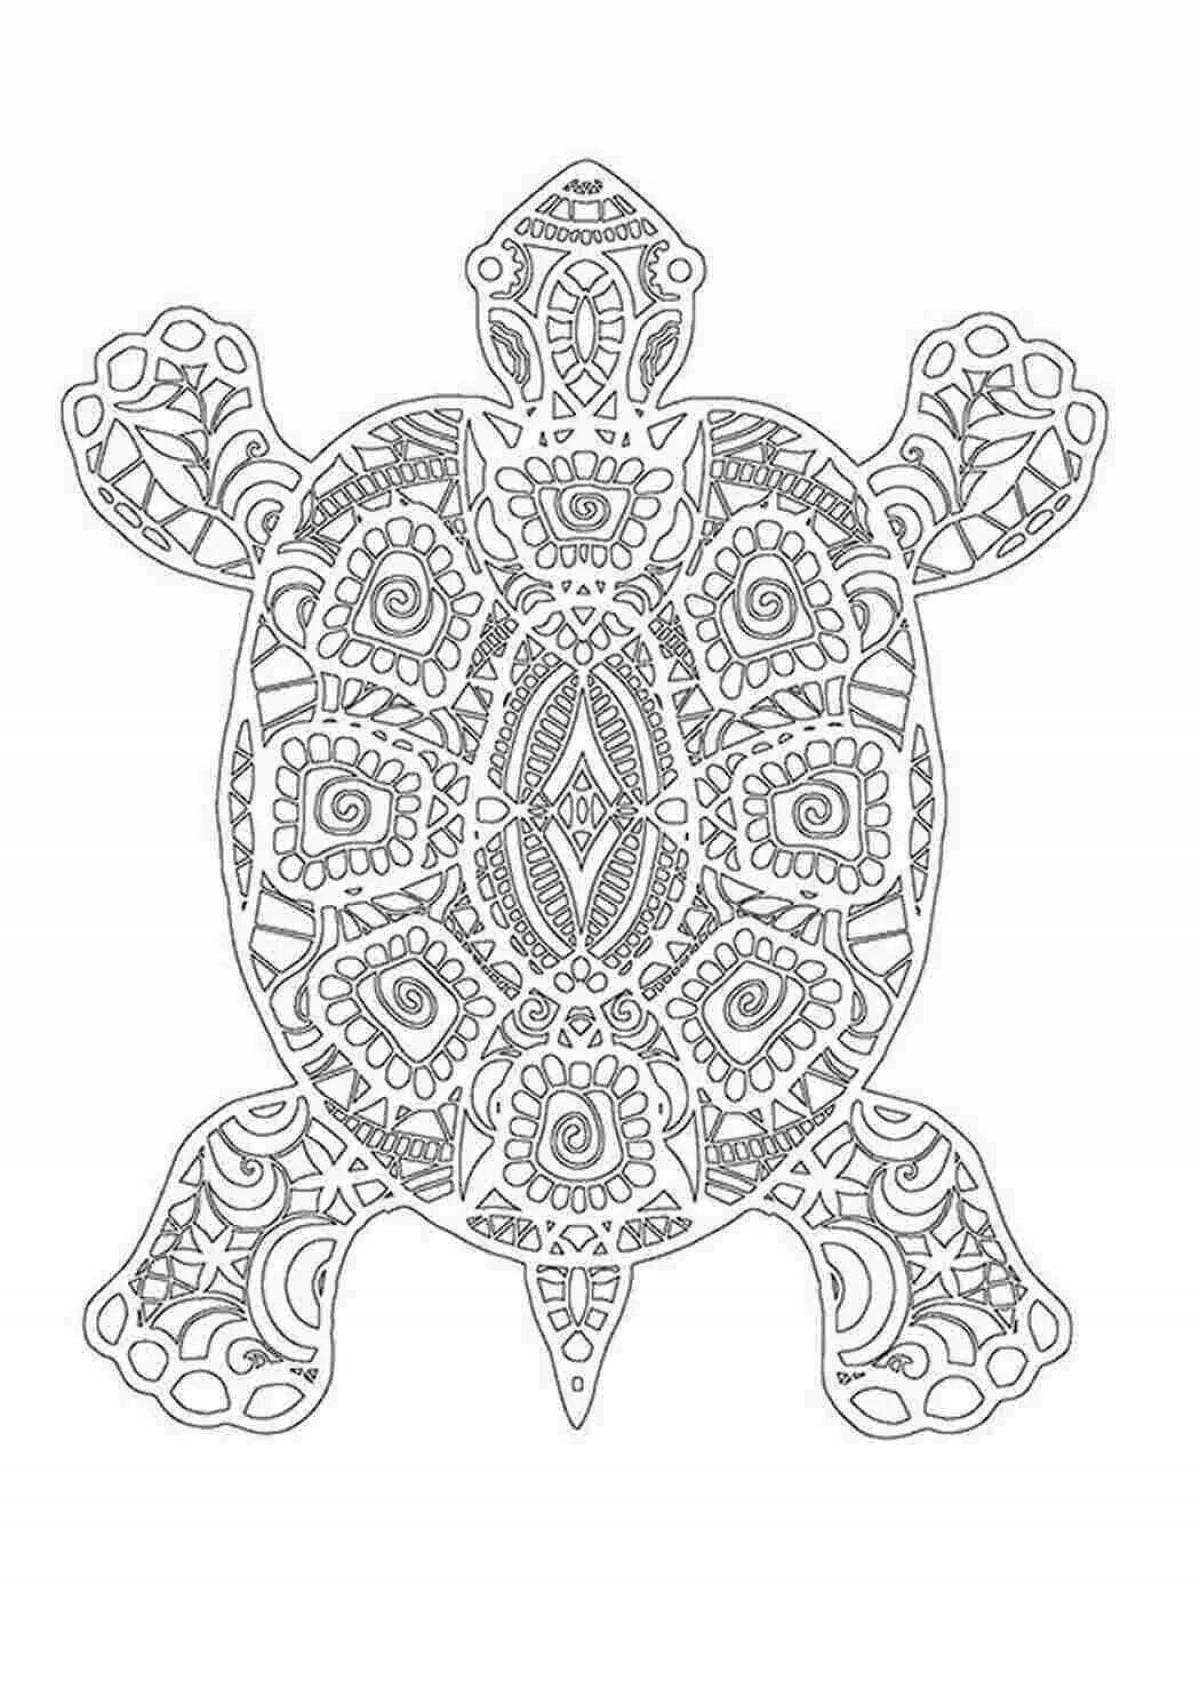 Serene anti-stress coloring book for kids